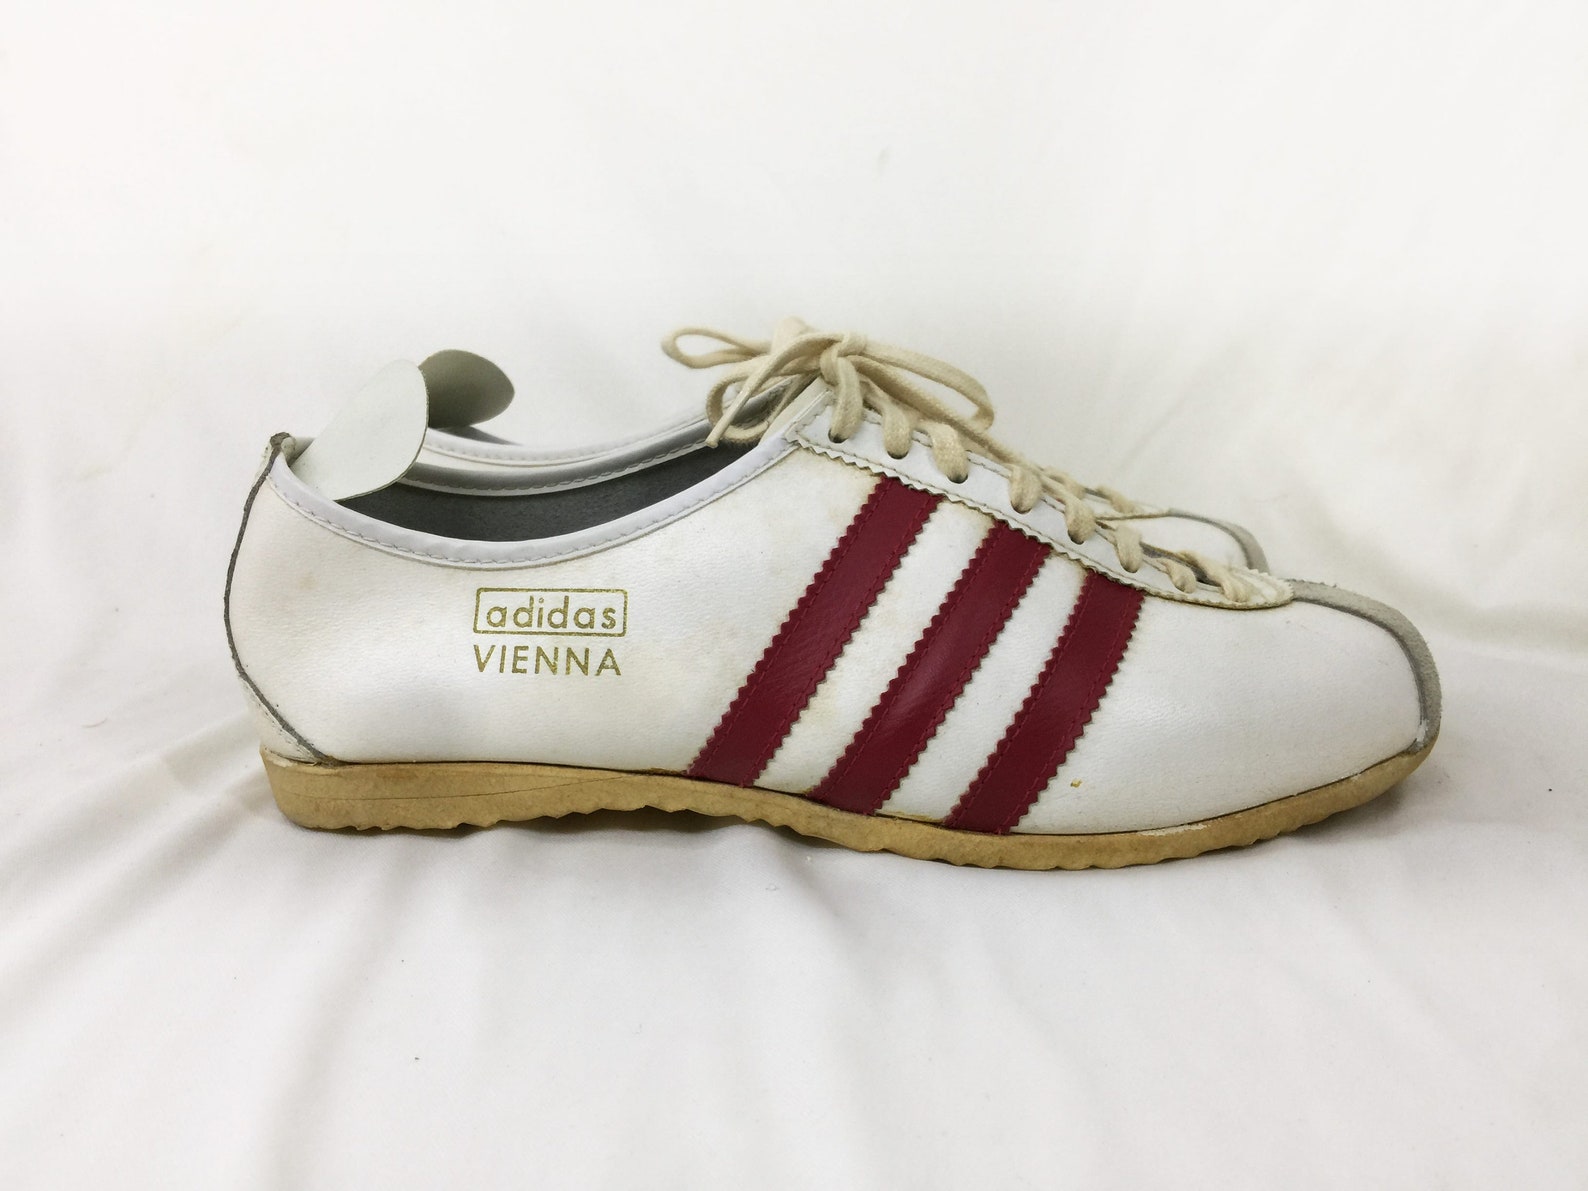 Super Rare 60s 70s Vintage Adidas Vienna shoes made in western | Etsy